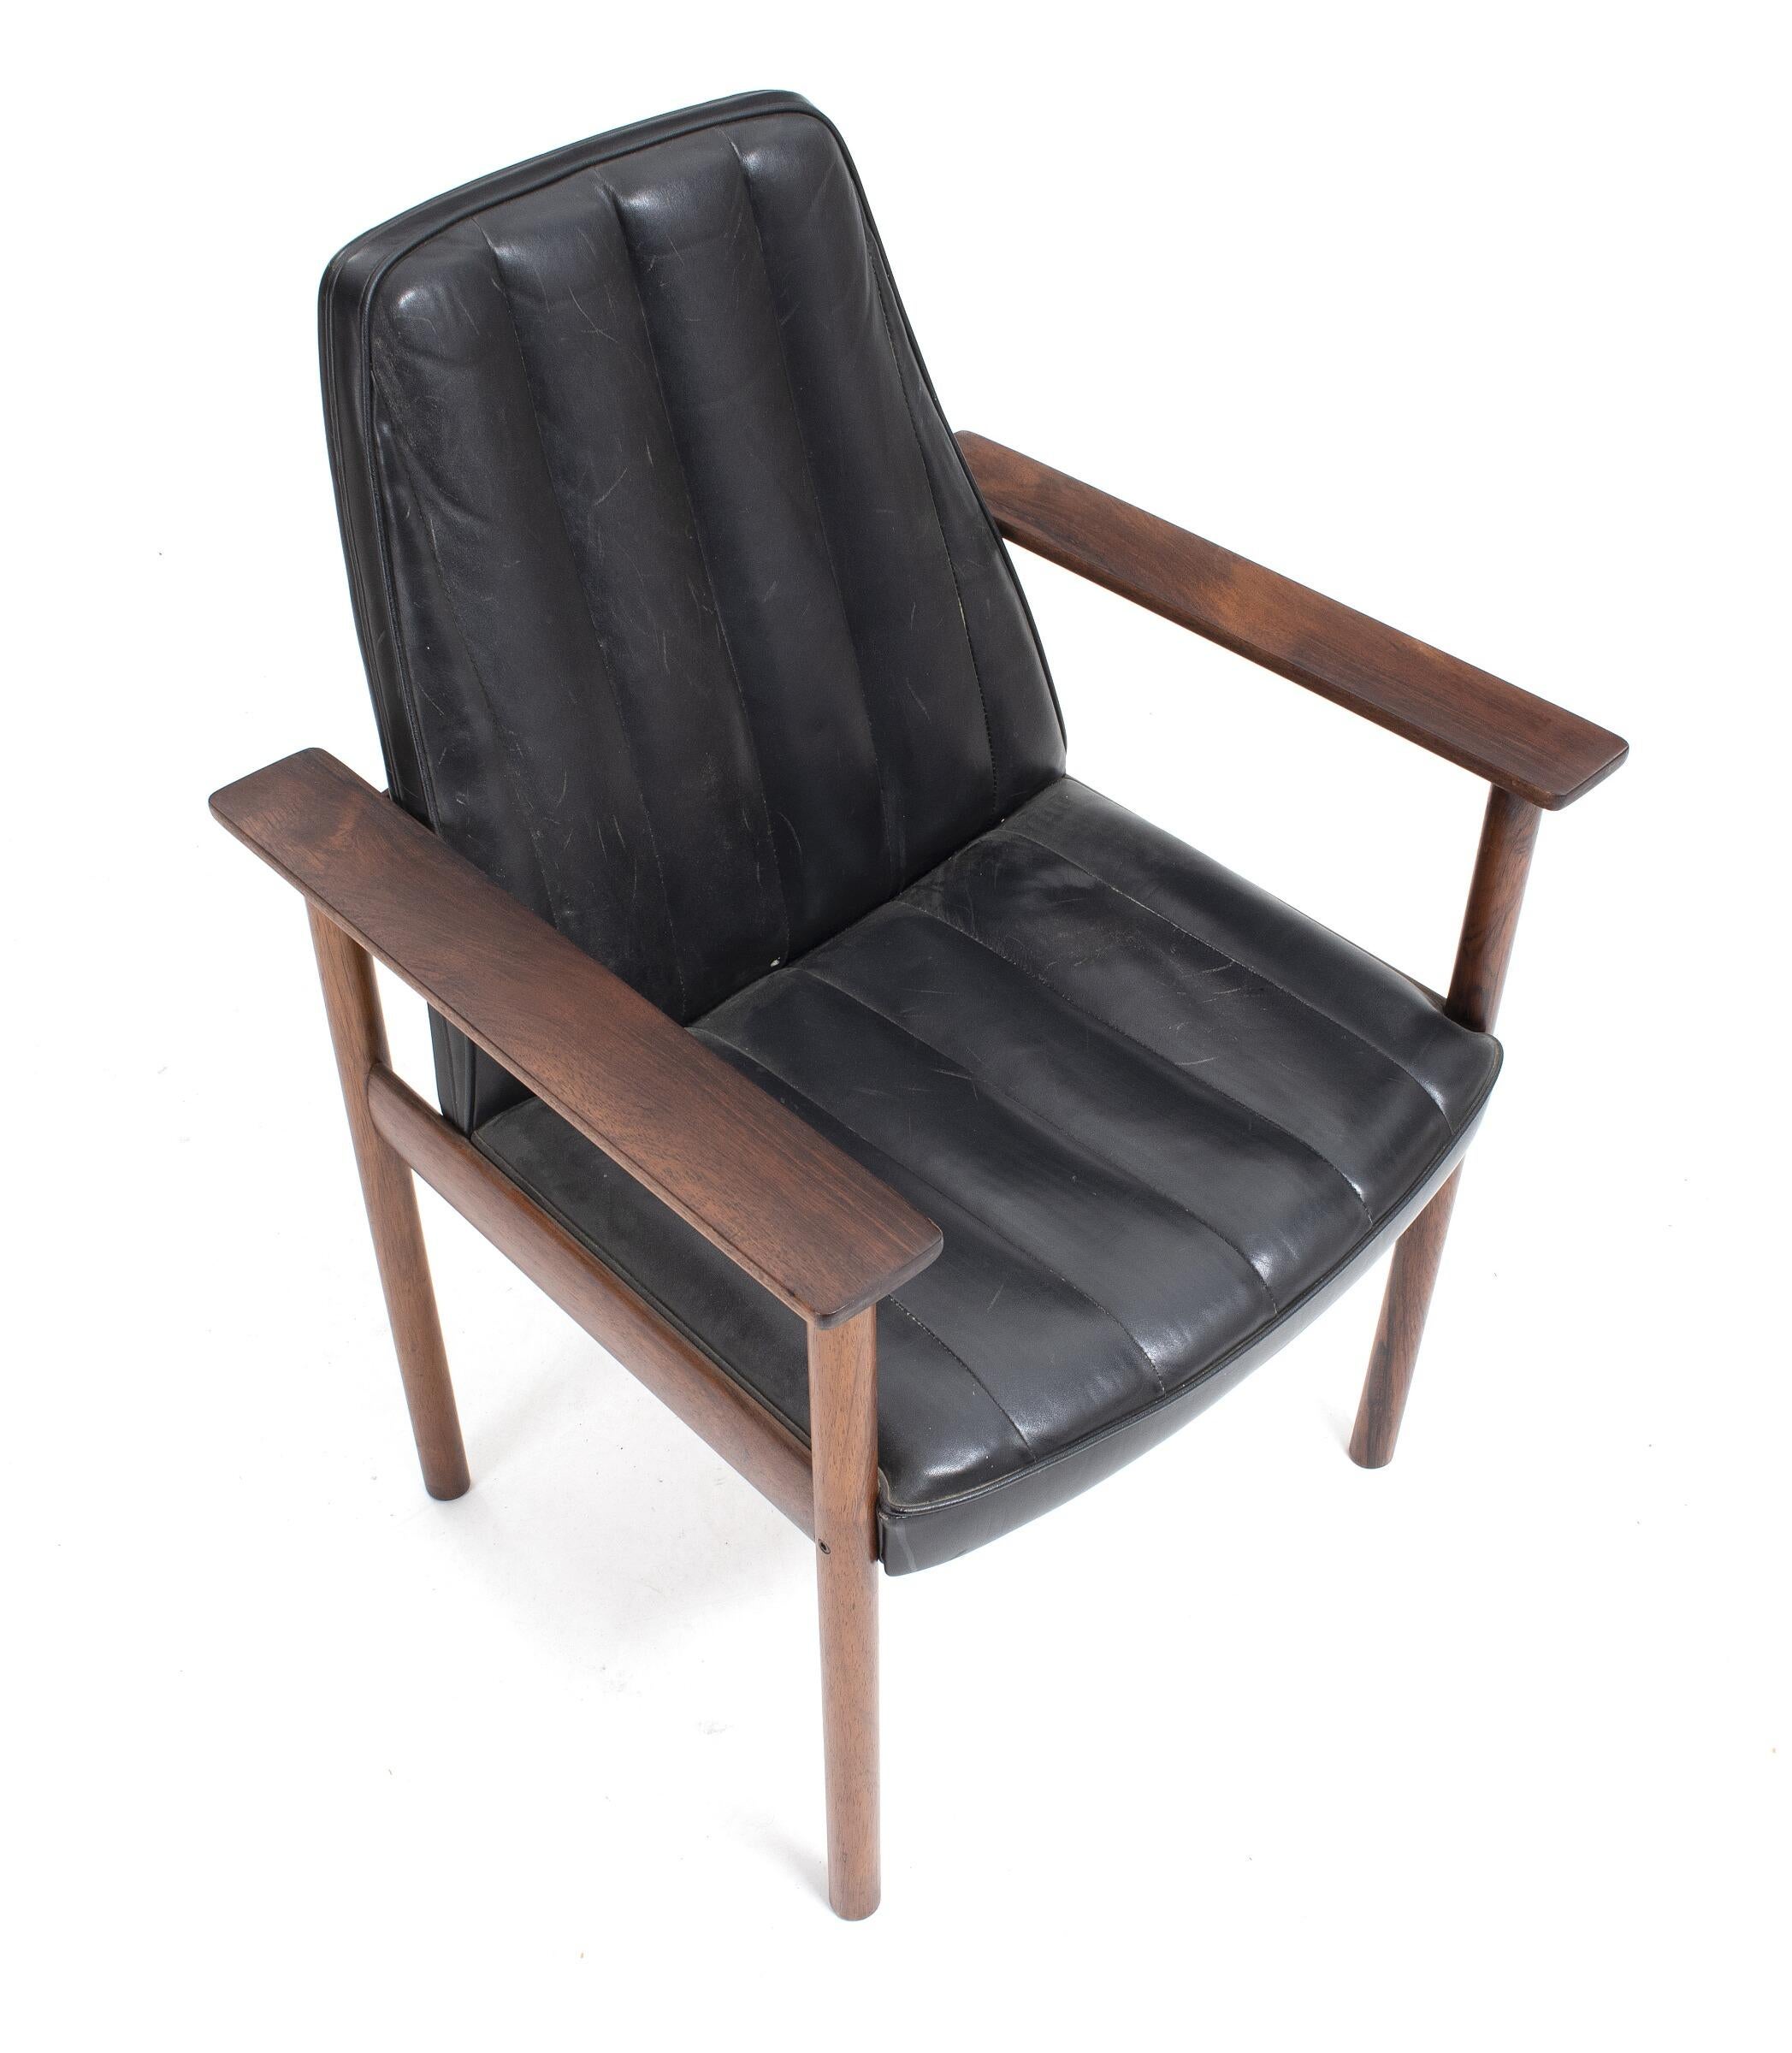 Hardwood frame and leather seat designed by Sven Ivar Dysthe in Norway for Dokka Mobler in the 1960s.
This chair is in very good originals condition with small patina on steel and wood parts.
Dimensions: 81 H x 65 W x 58 D cm.